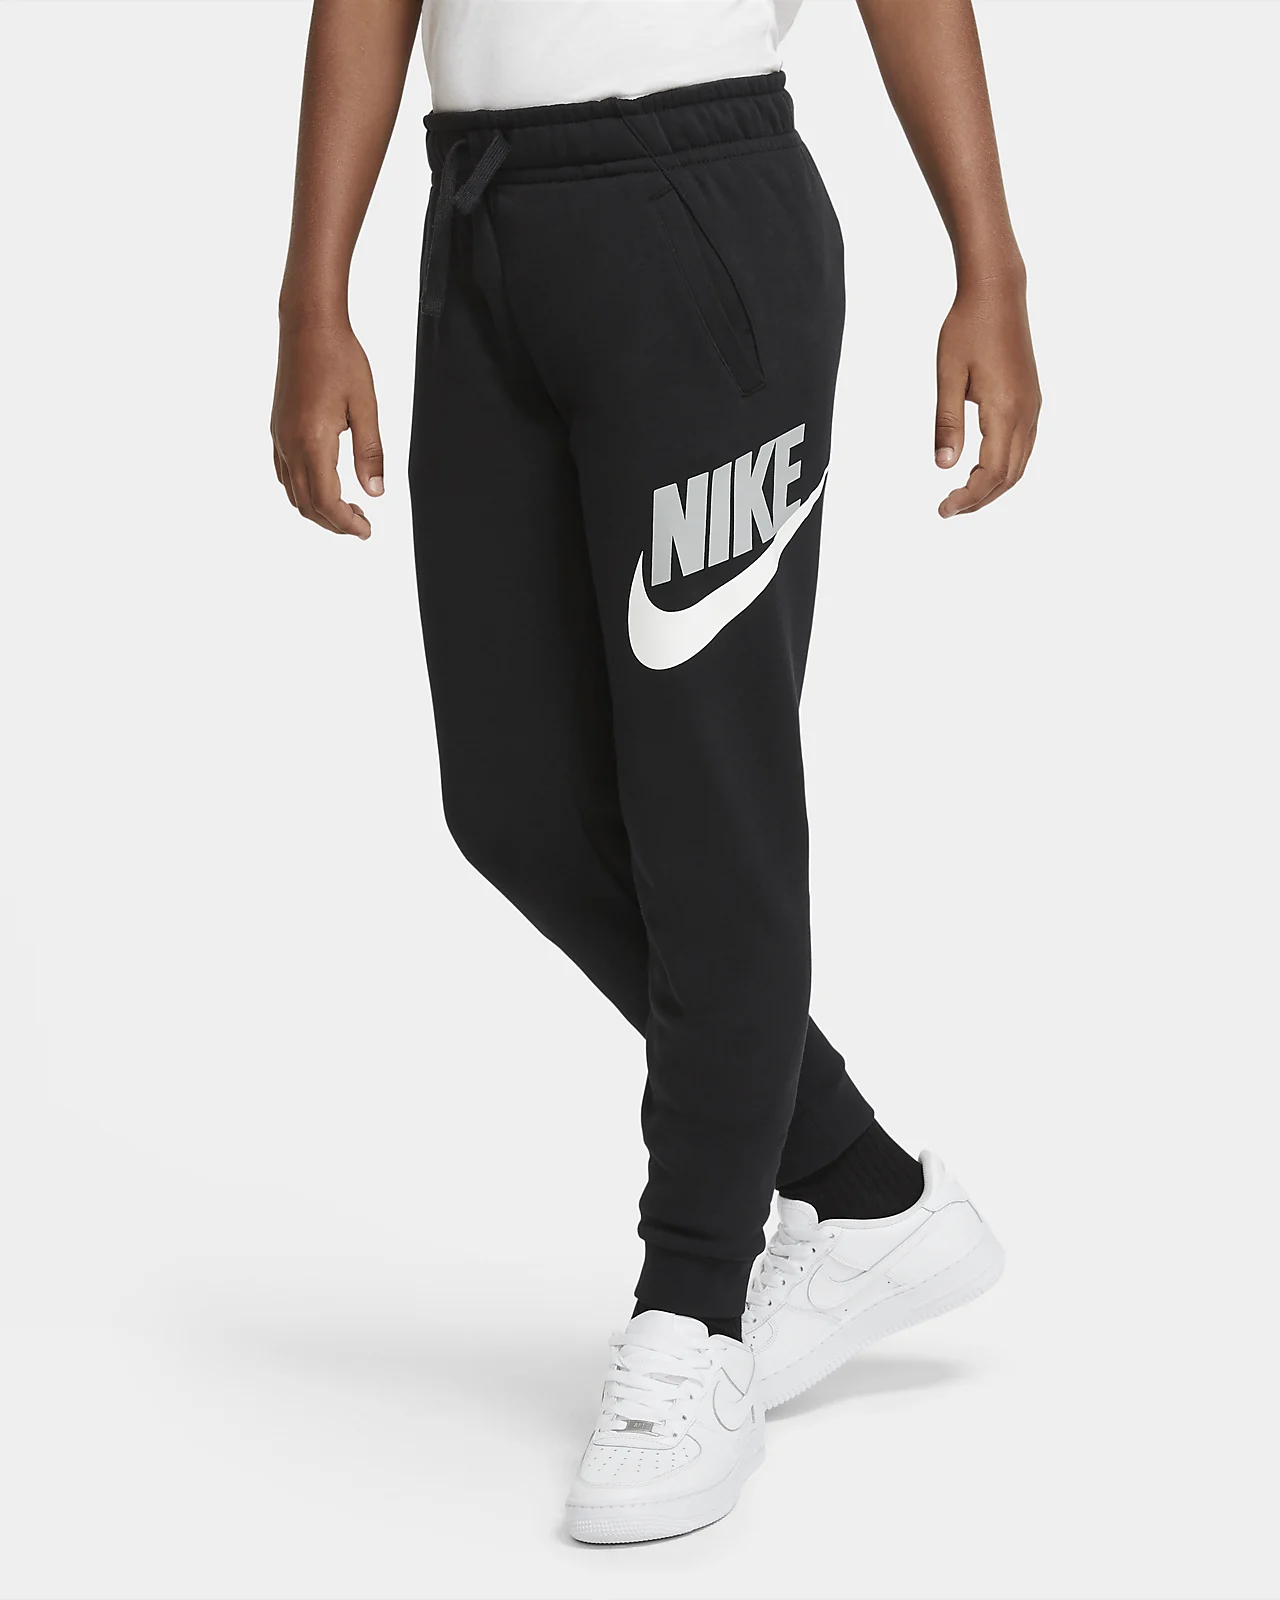 Nike Athletic Pants: Unrivaled Performance, Iconic Design, and Sportswear Innovation